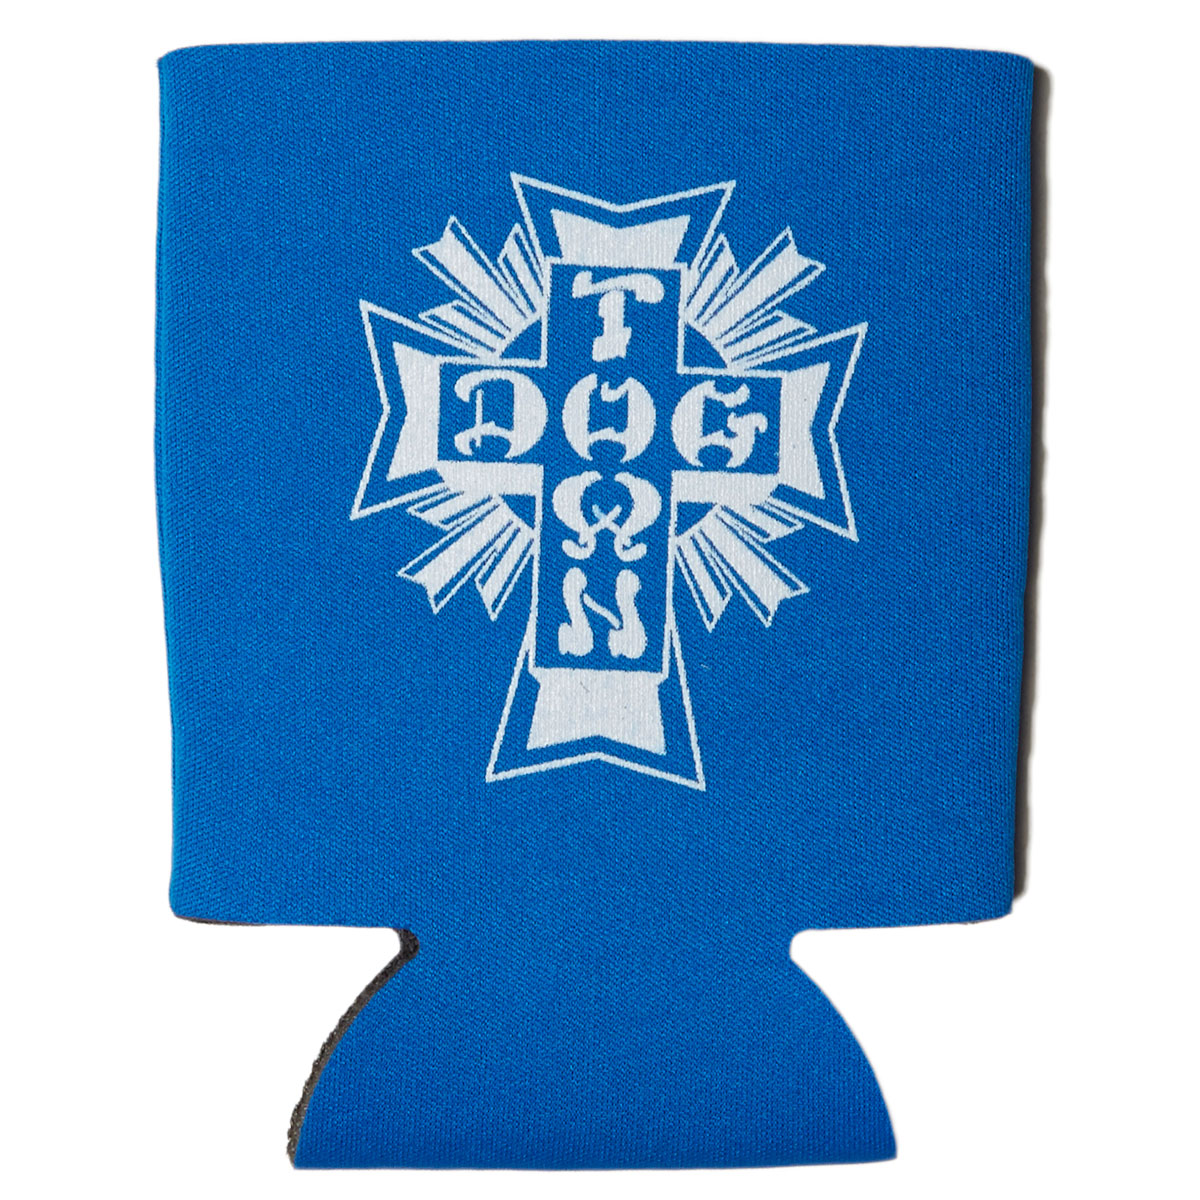 Dogtown Cross Logo Coozie - Royal Blue image 1